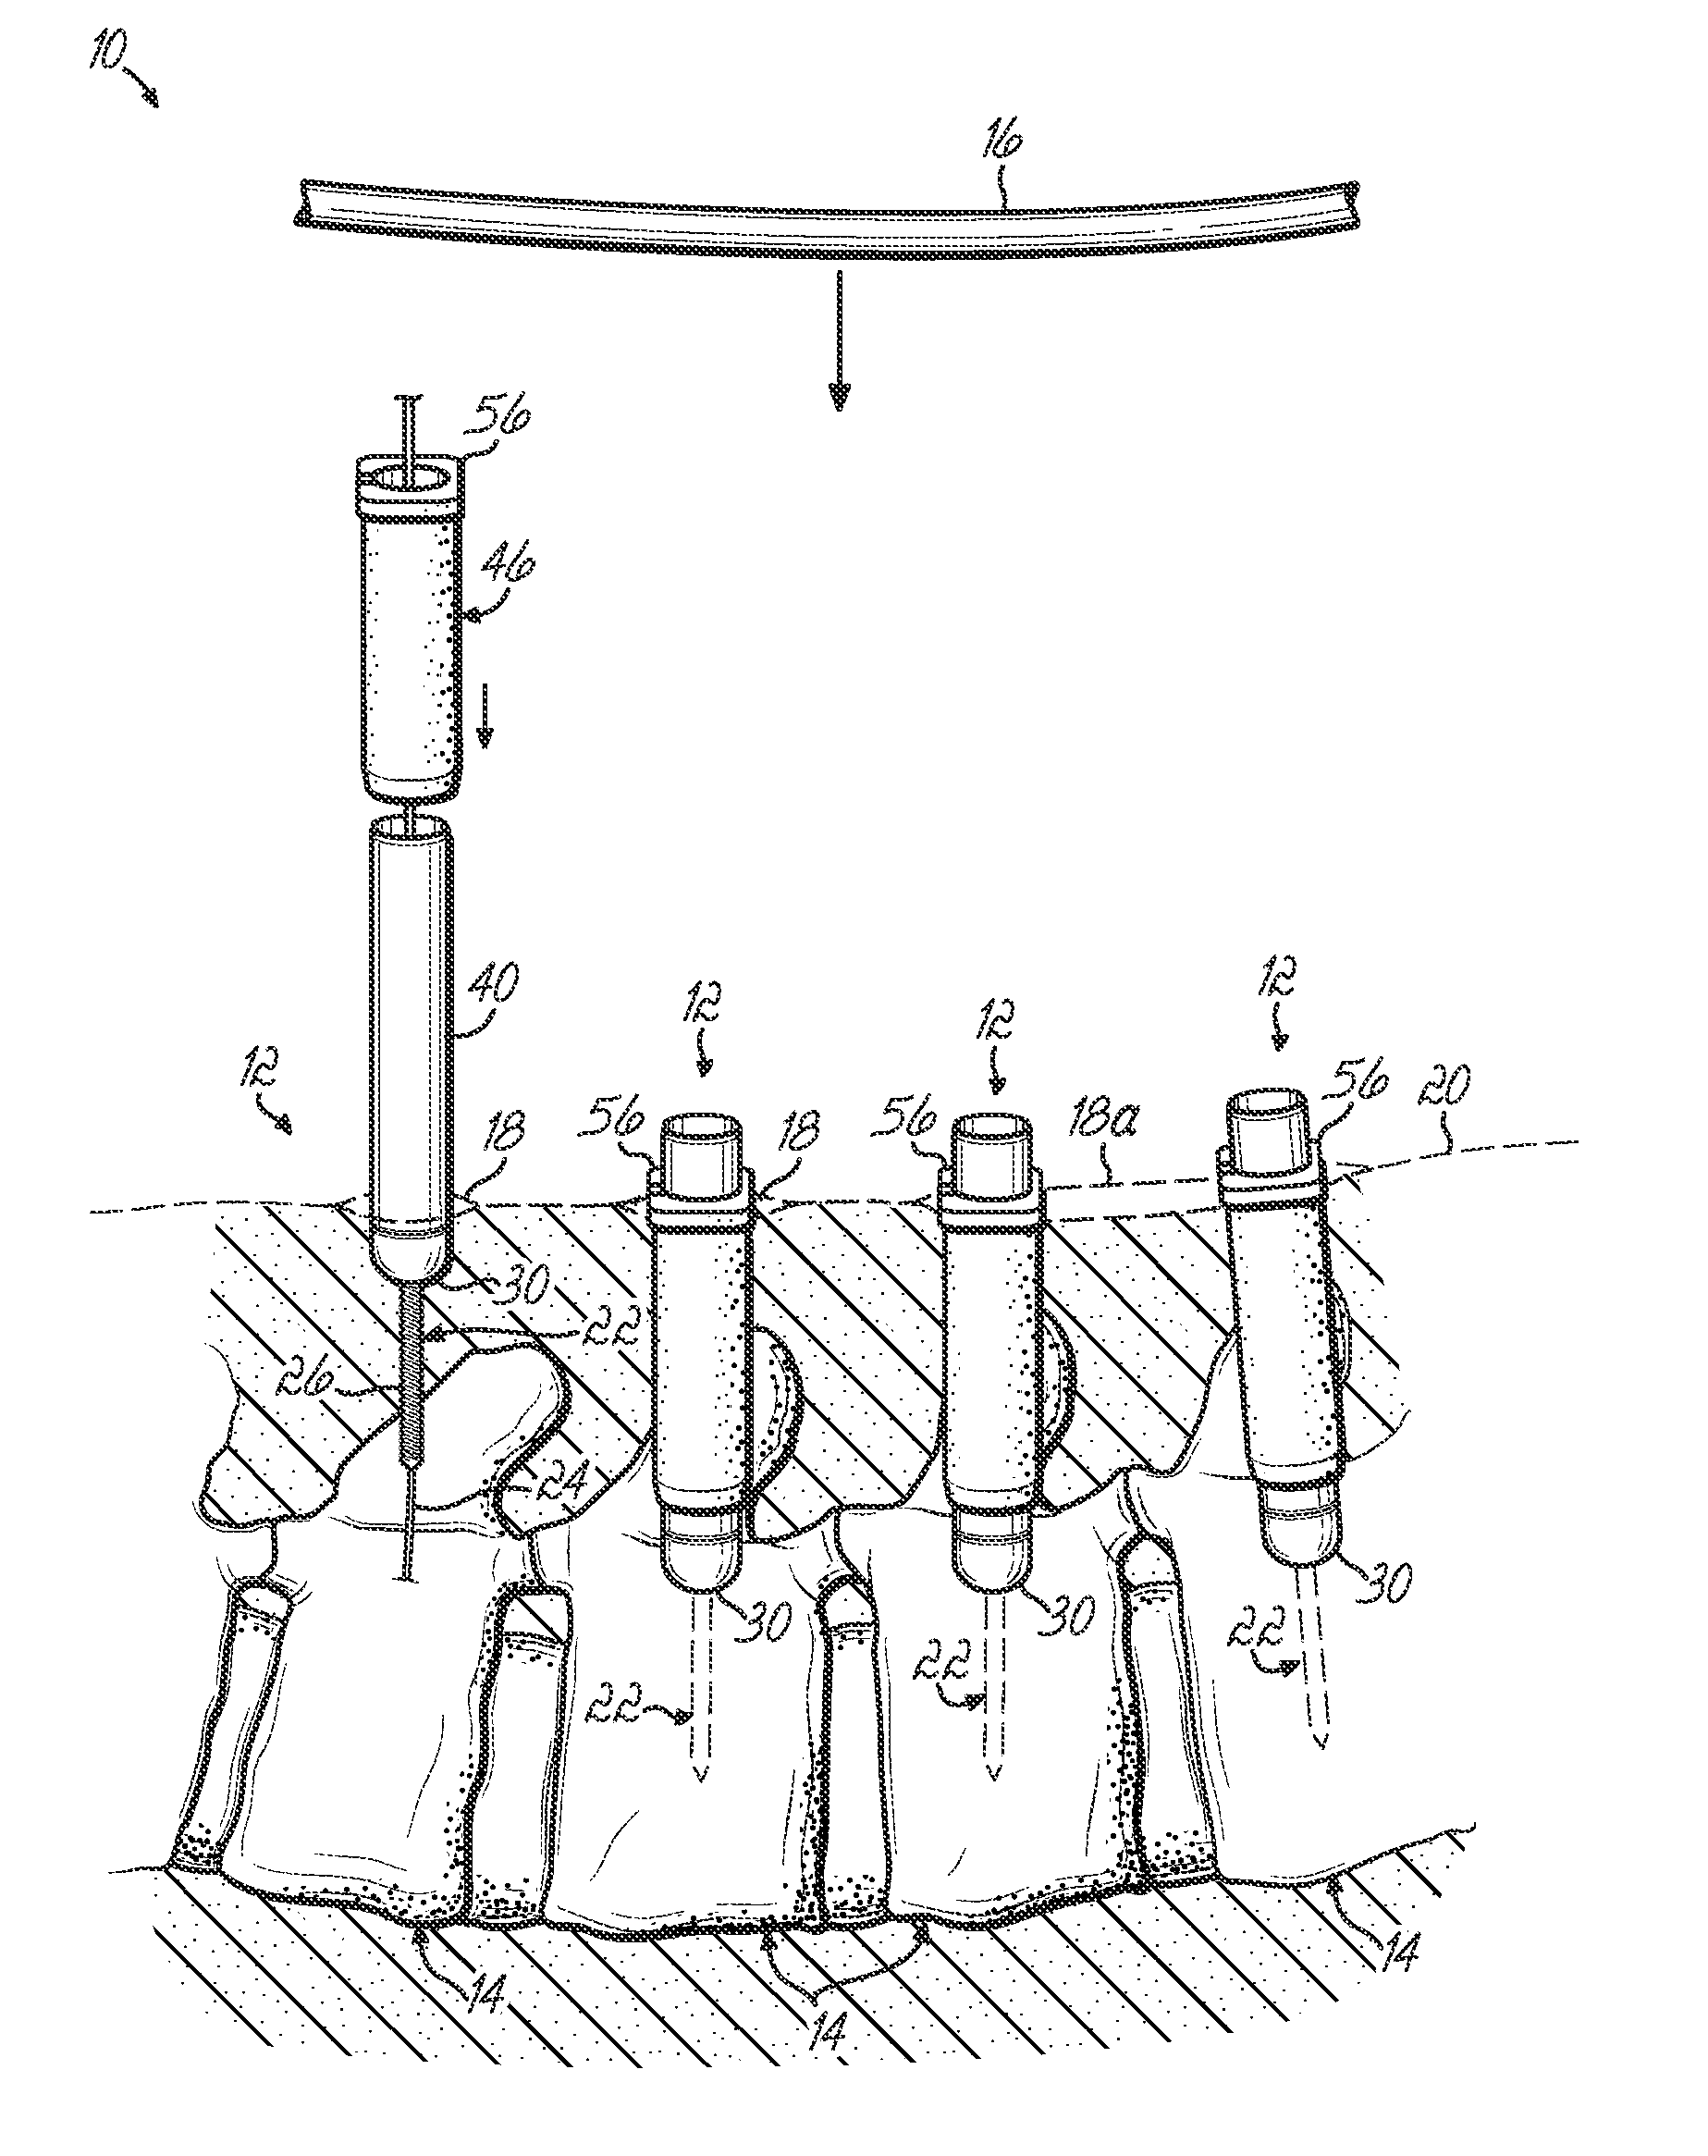 Minimally invasive pedicle screw access system and associated method